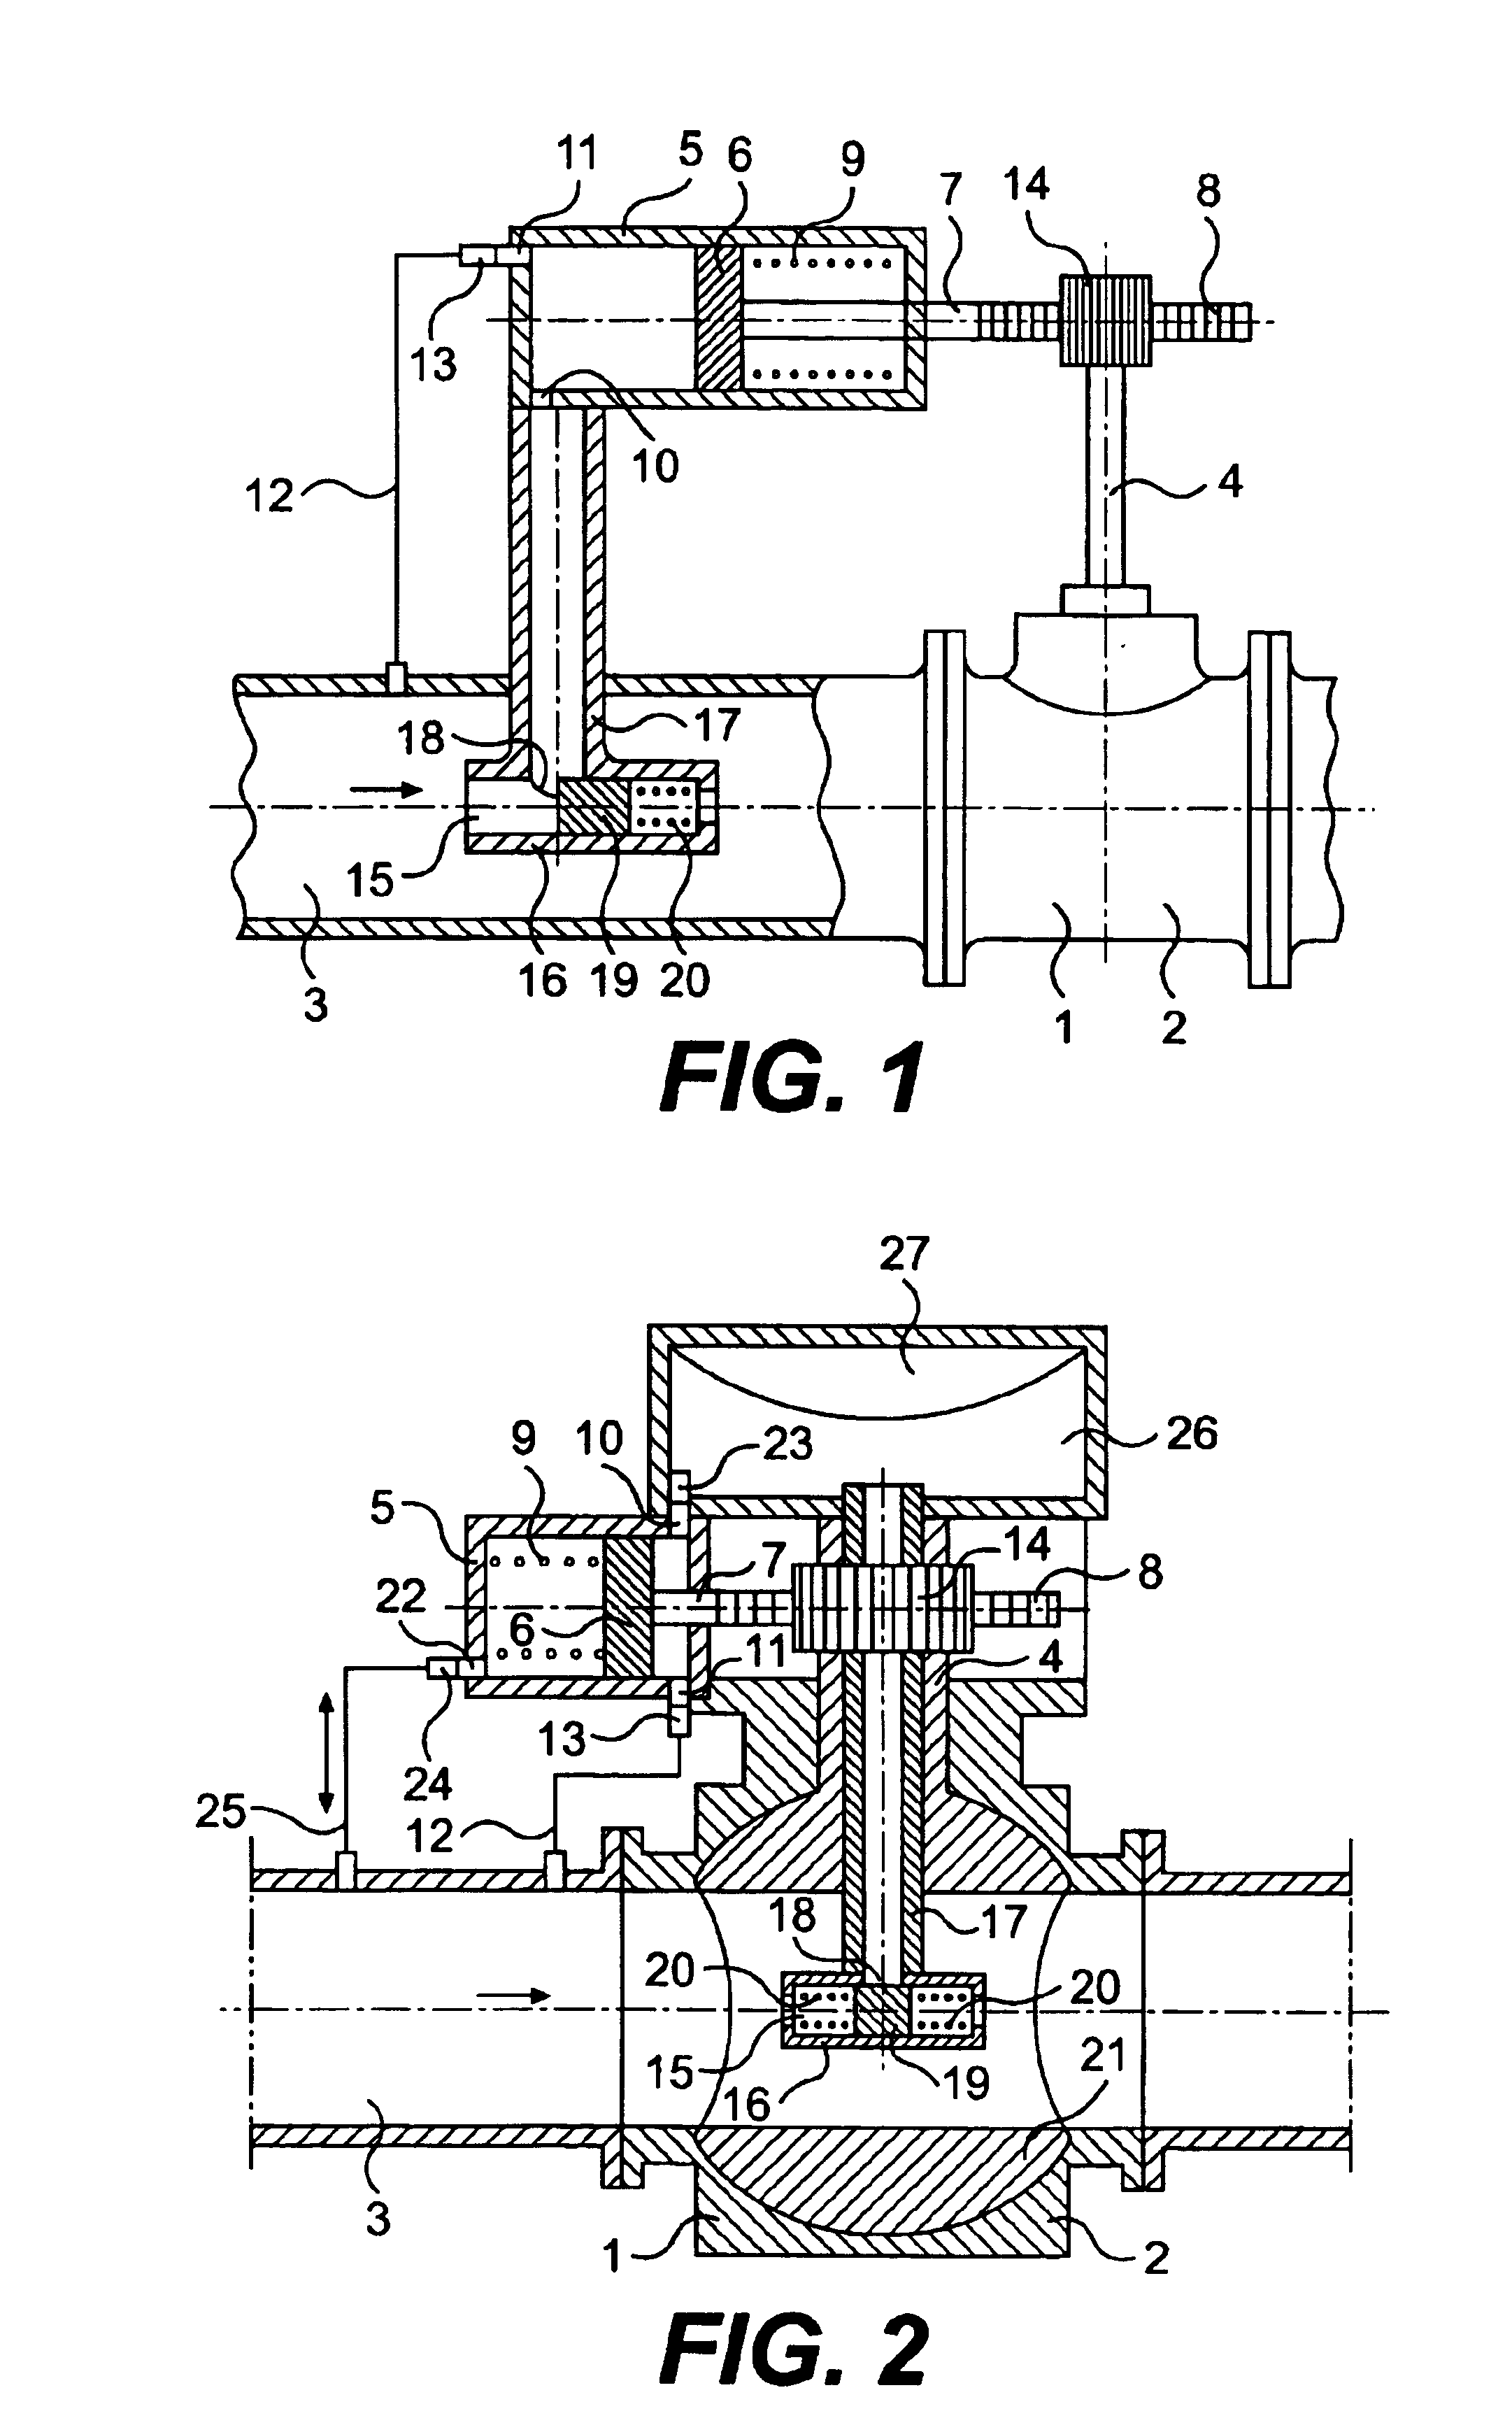 Self-operated protection device for pipeline